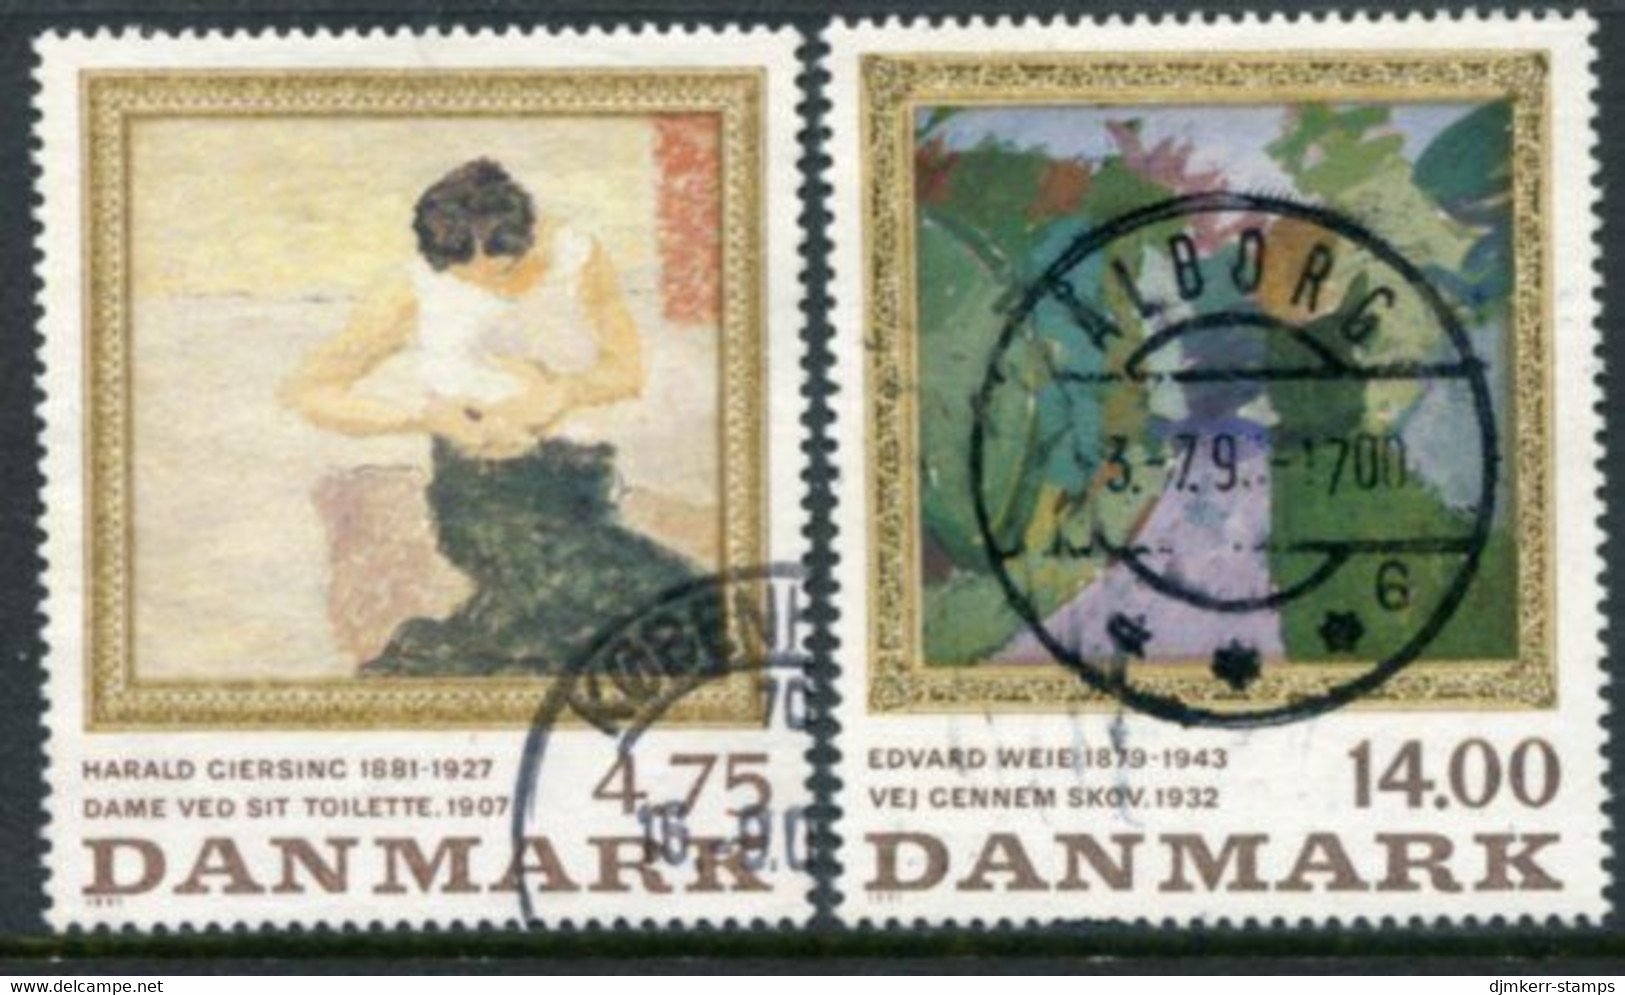 DENMARK 1991 Paintings Used.   Michel 1016-17 - Used Stamps